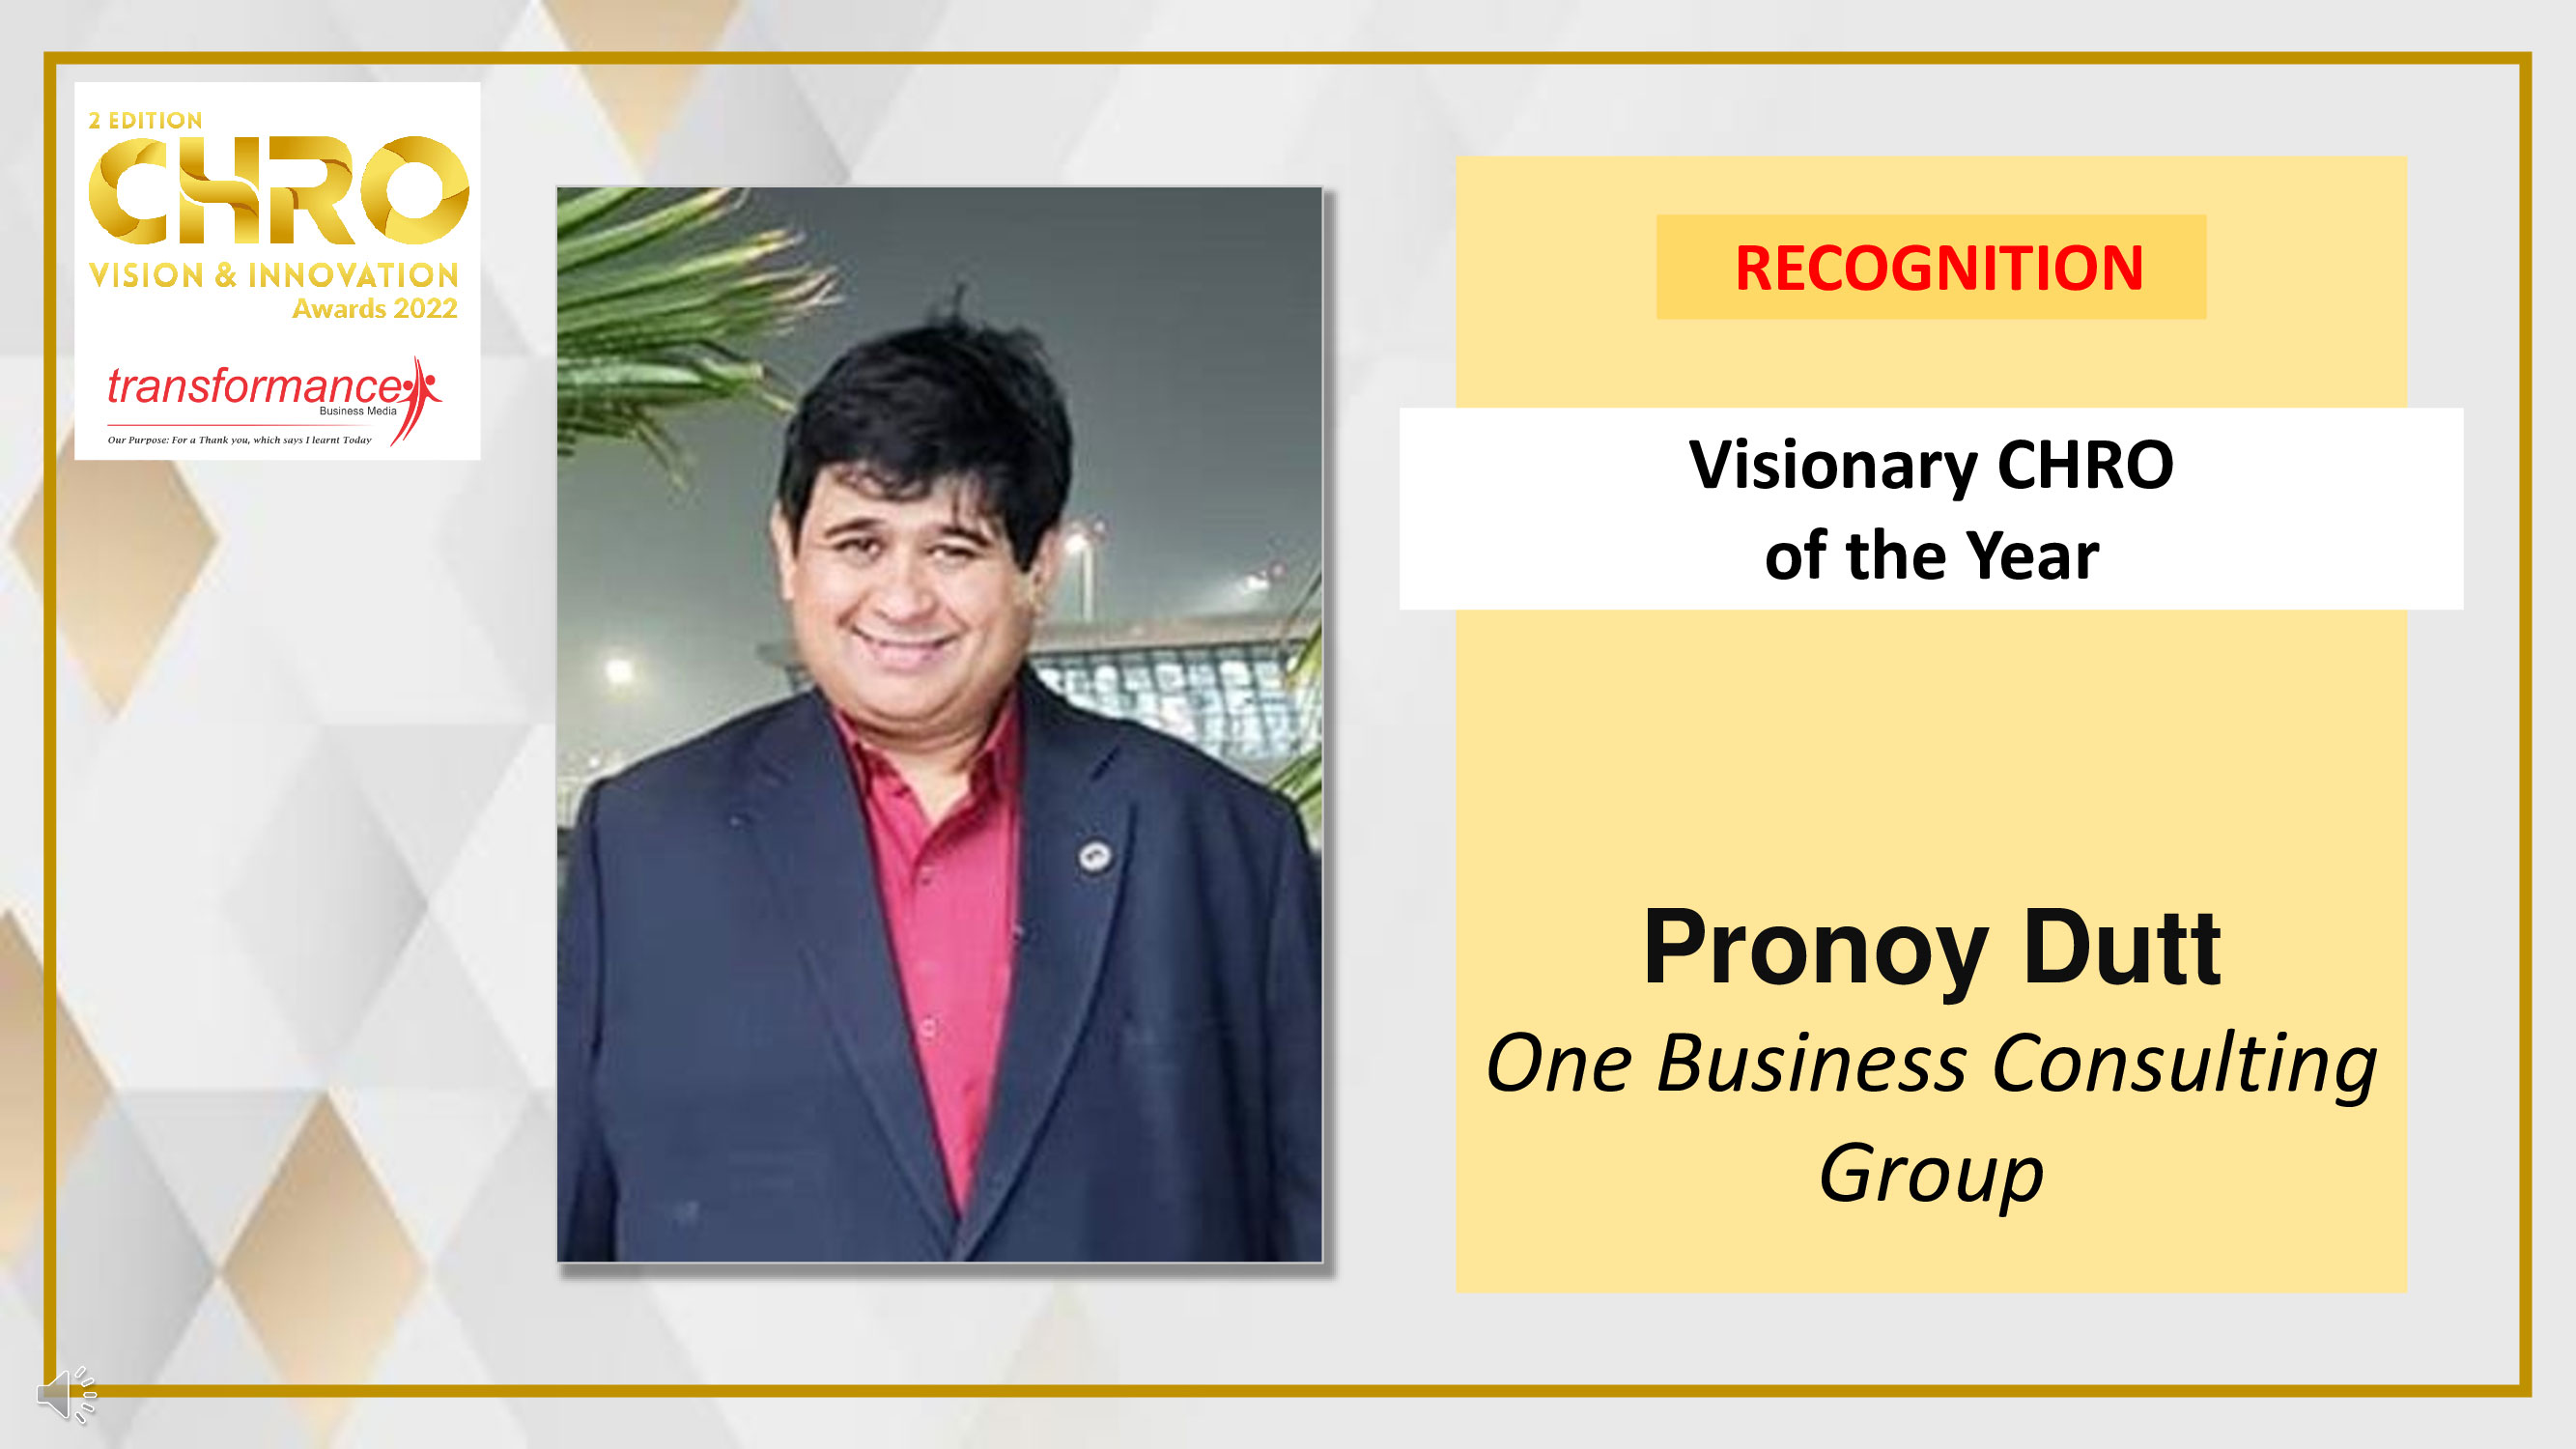 Pronoy Dutt, One Business Consulting Group